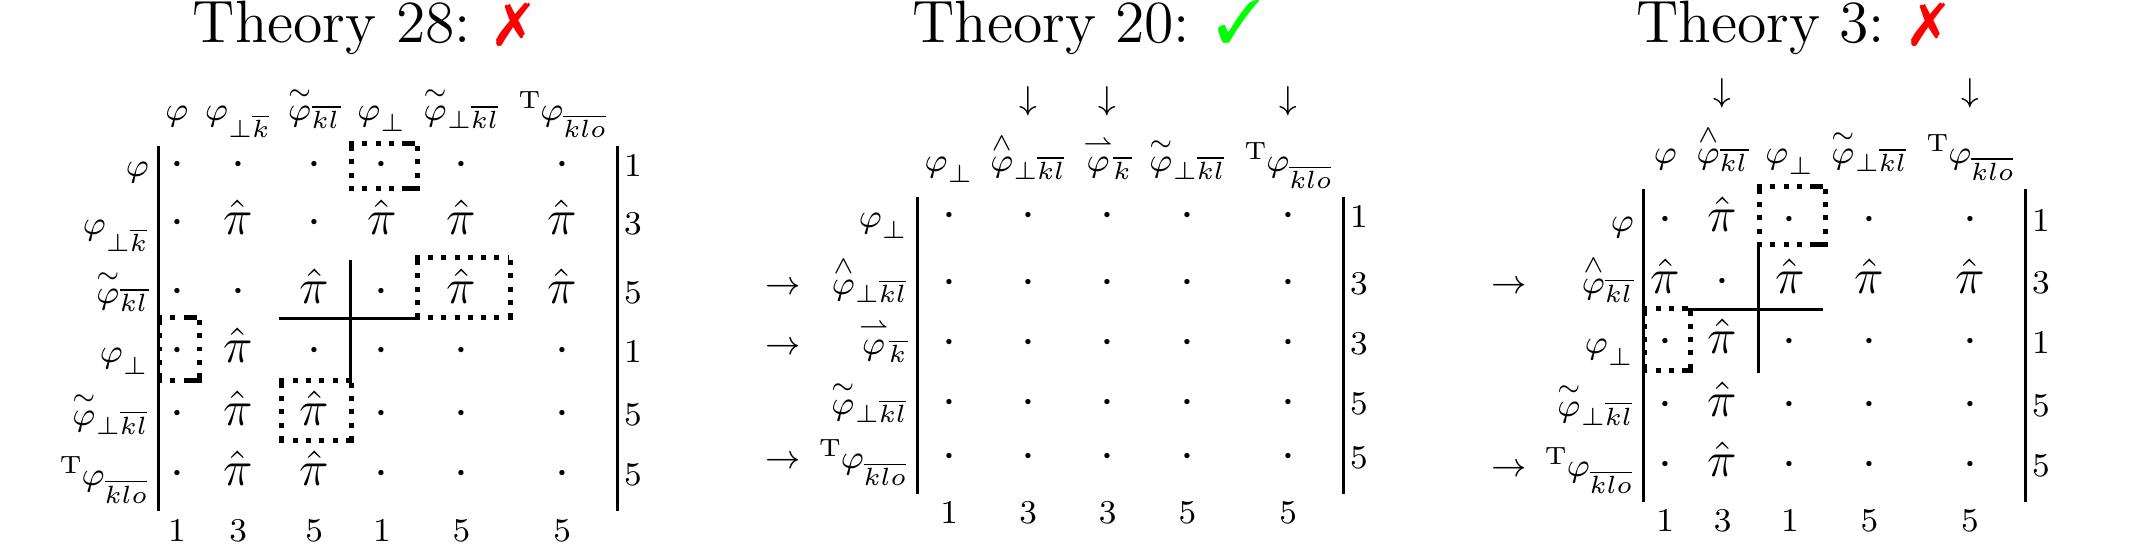 Nonlinear primary poisson matrices of three candidate theories of gravity.